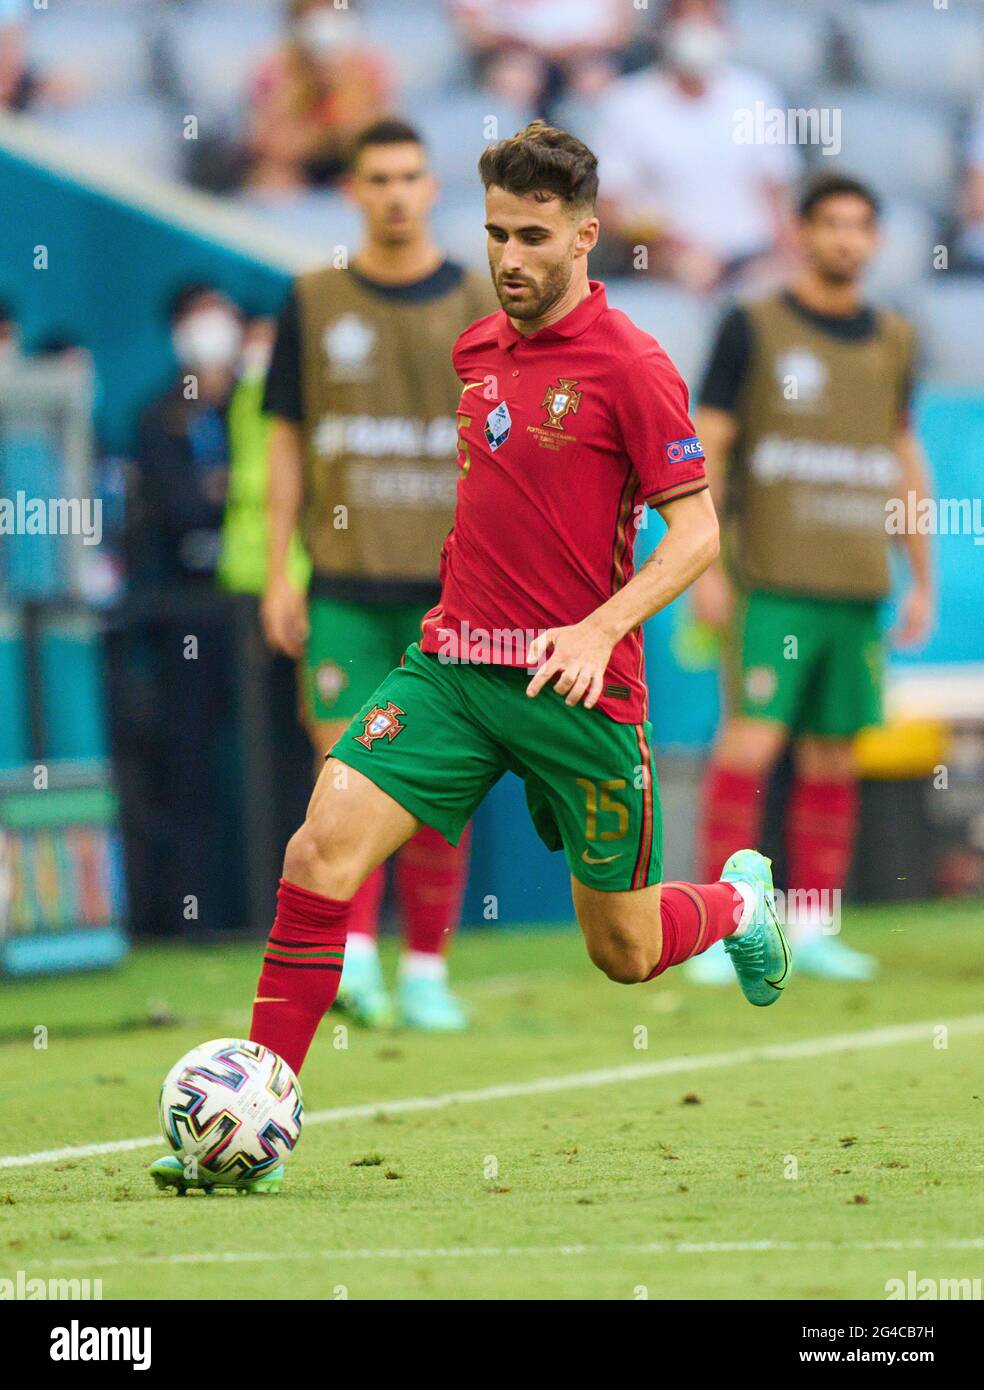 Munich, Germany. 19th June, 2021. Rafa Silva, POR 15  in the Group F match PORTUGAL - GERMANY 2-4  at the football UEFA European Championships 2020 in Season 2020/2021 on June 19, 2021  in Munich, Germany. © Peter Schatz / Alamy Live News Stock Photo